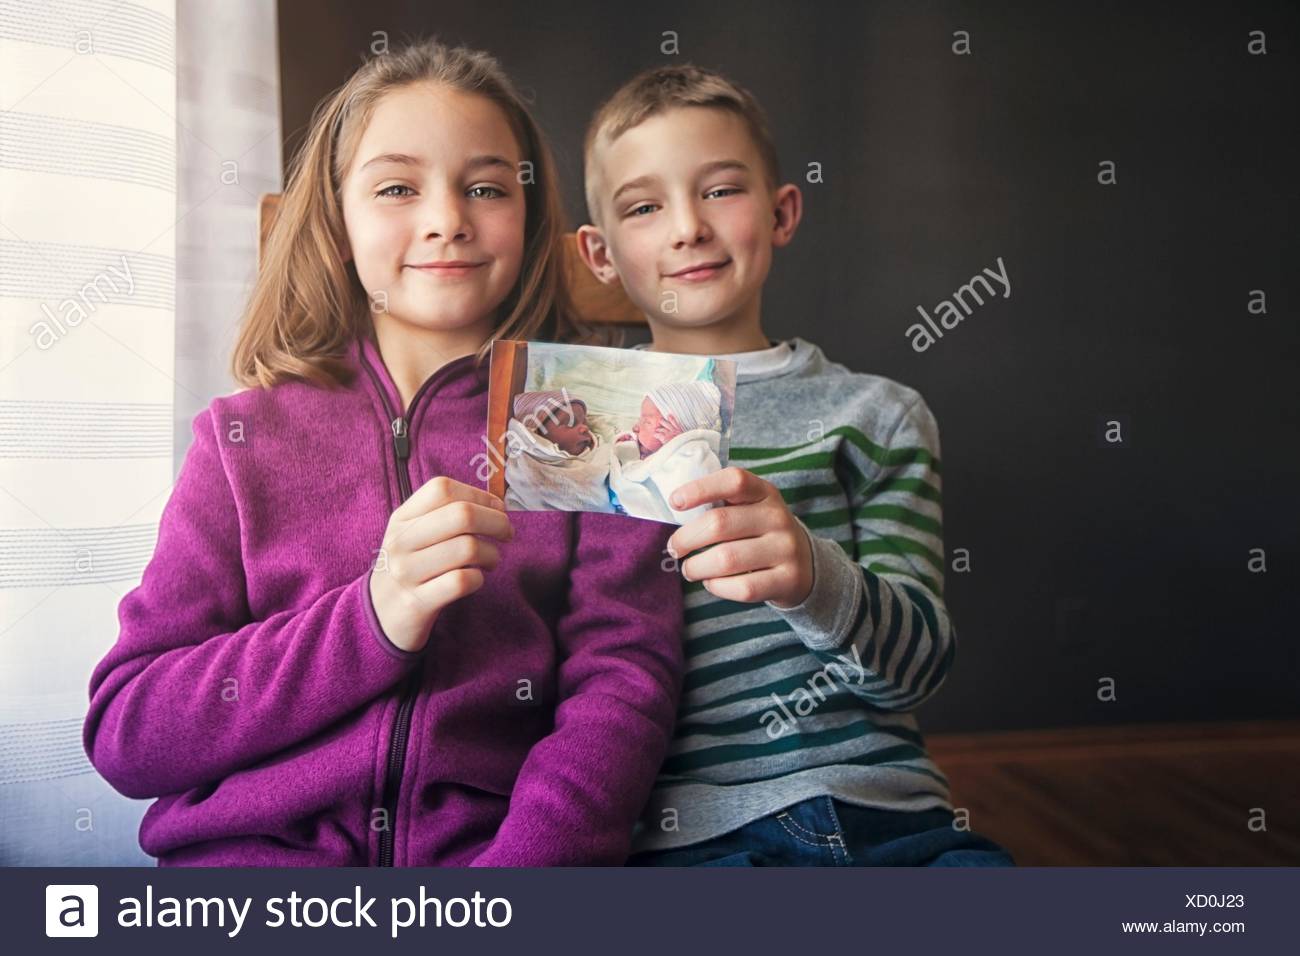 Boy Girl Twins Babies High Resolution Stock Photography And Images Alamy